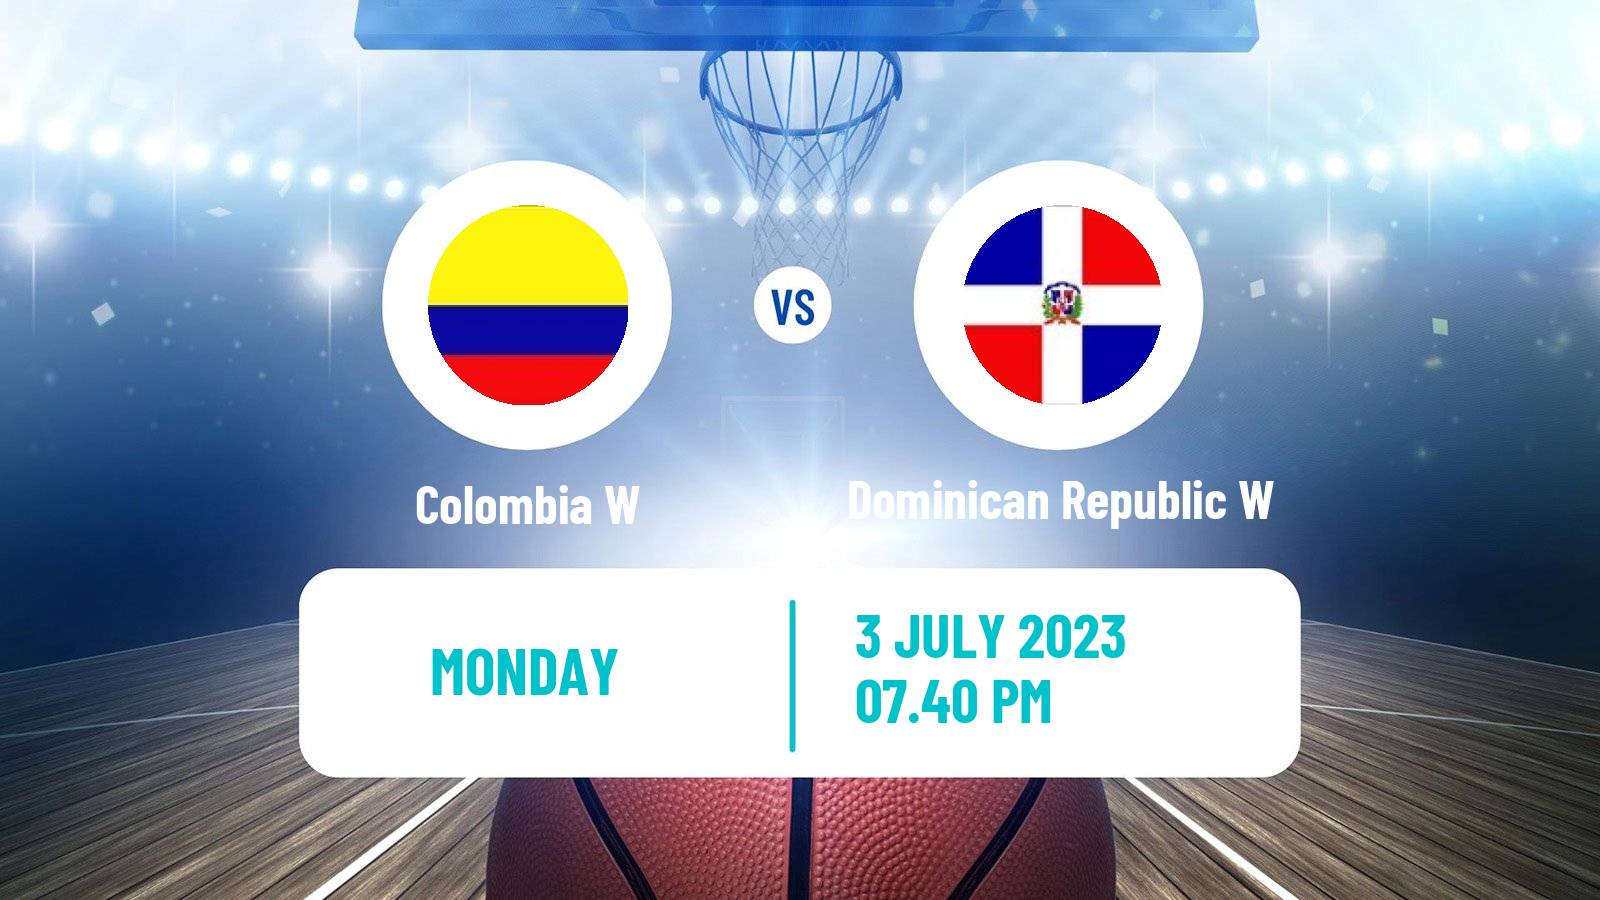 Basketball AmeriCup Basketball Women Colombia W - Dominican Republic W